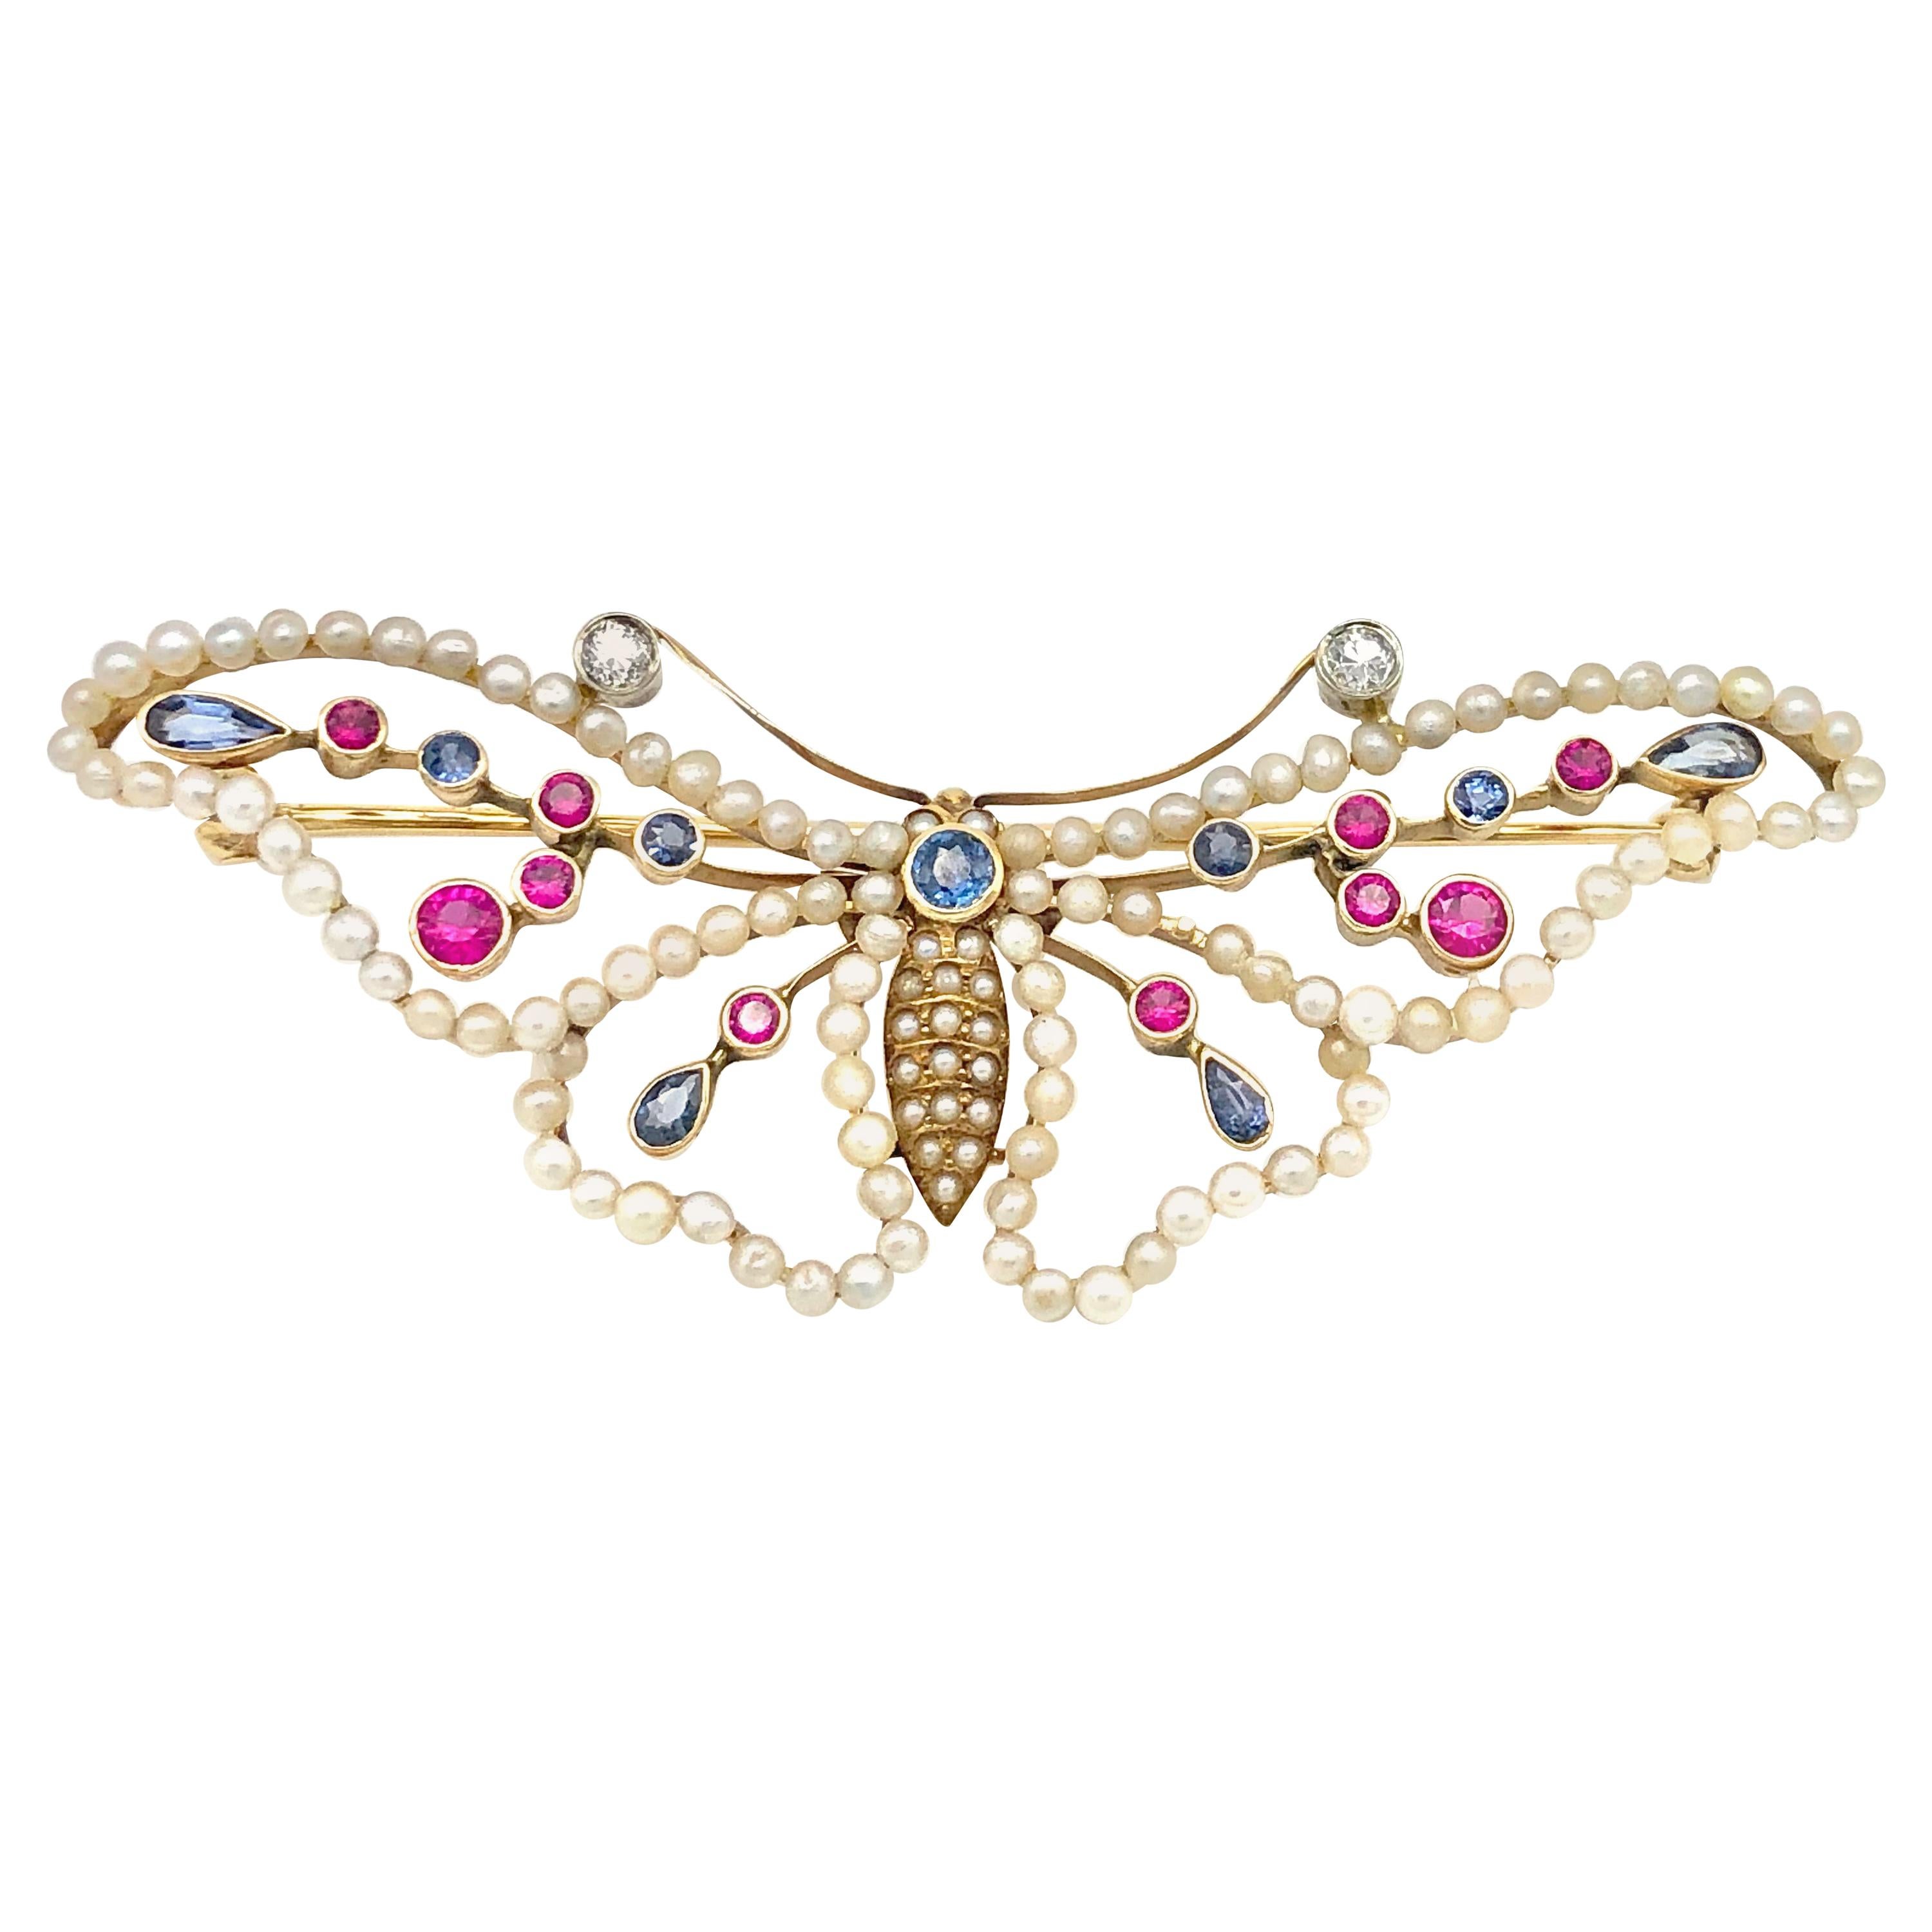 Antique Belle Époque Butterfly Psyche Soul Pearls Sapphires Rubies Gold Brooch